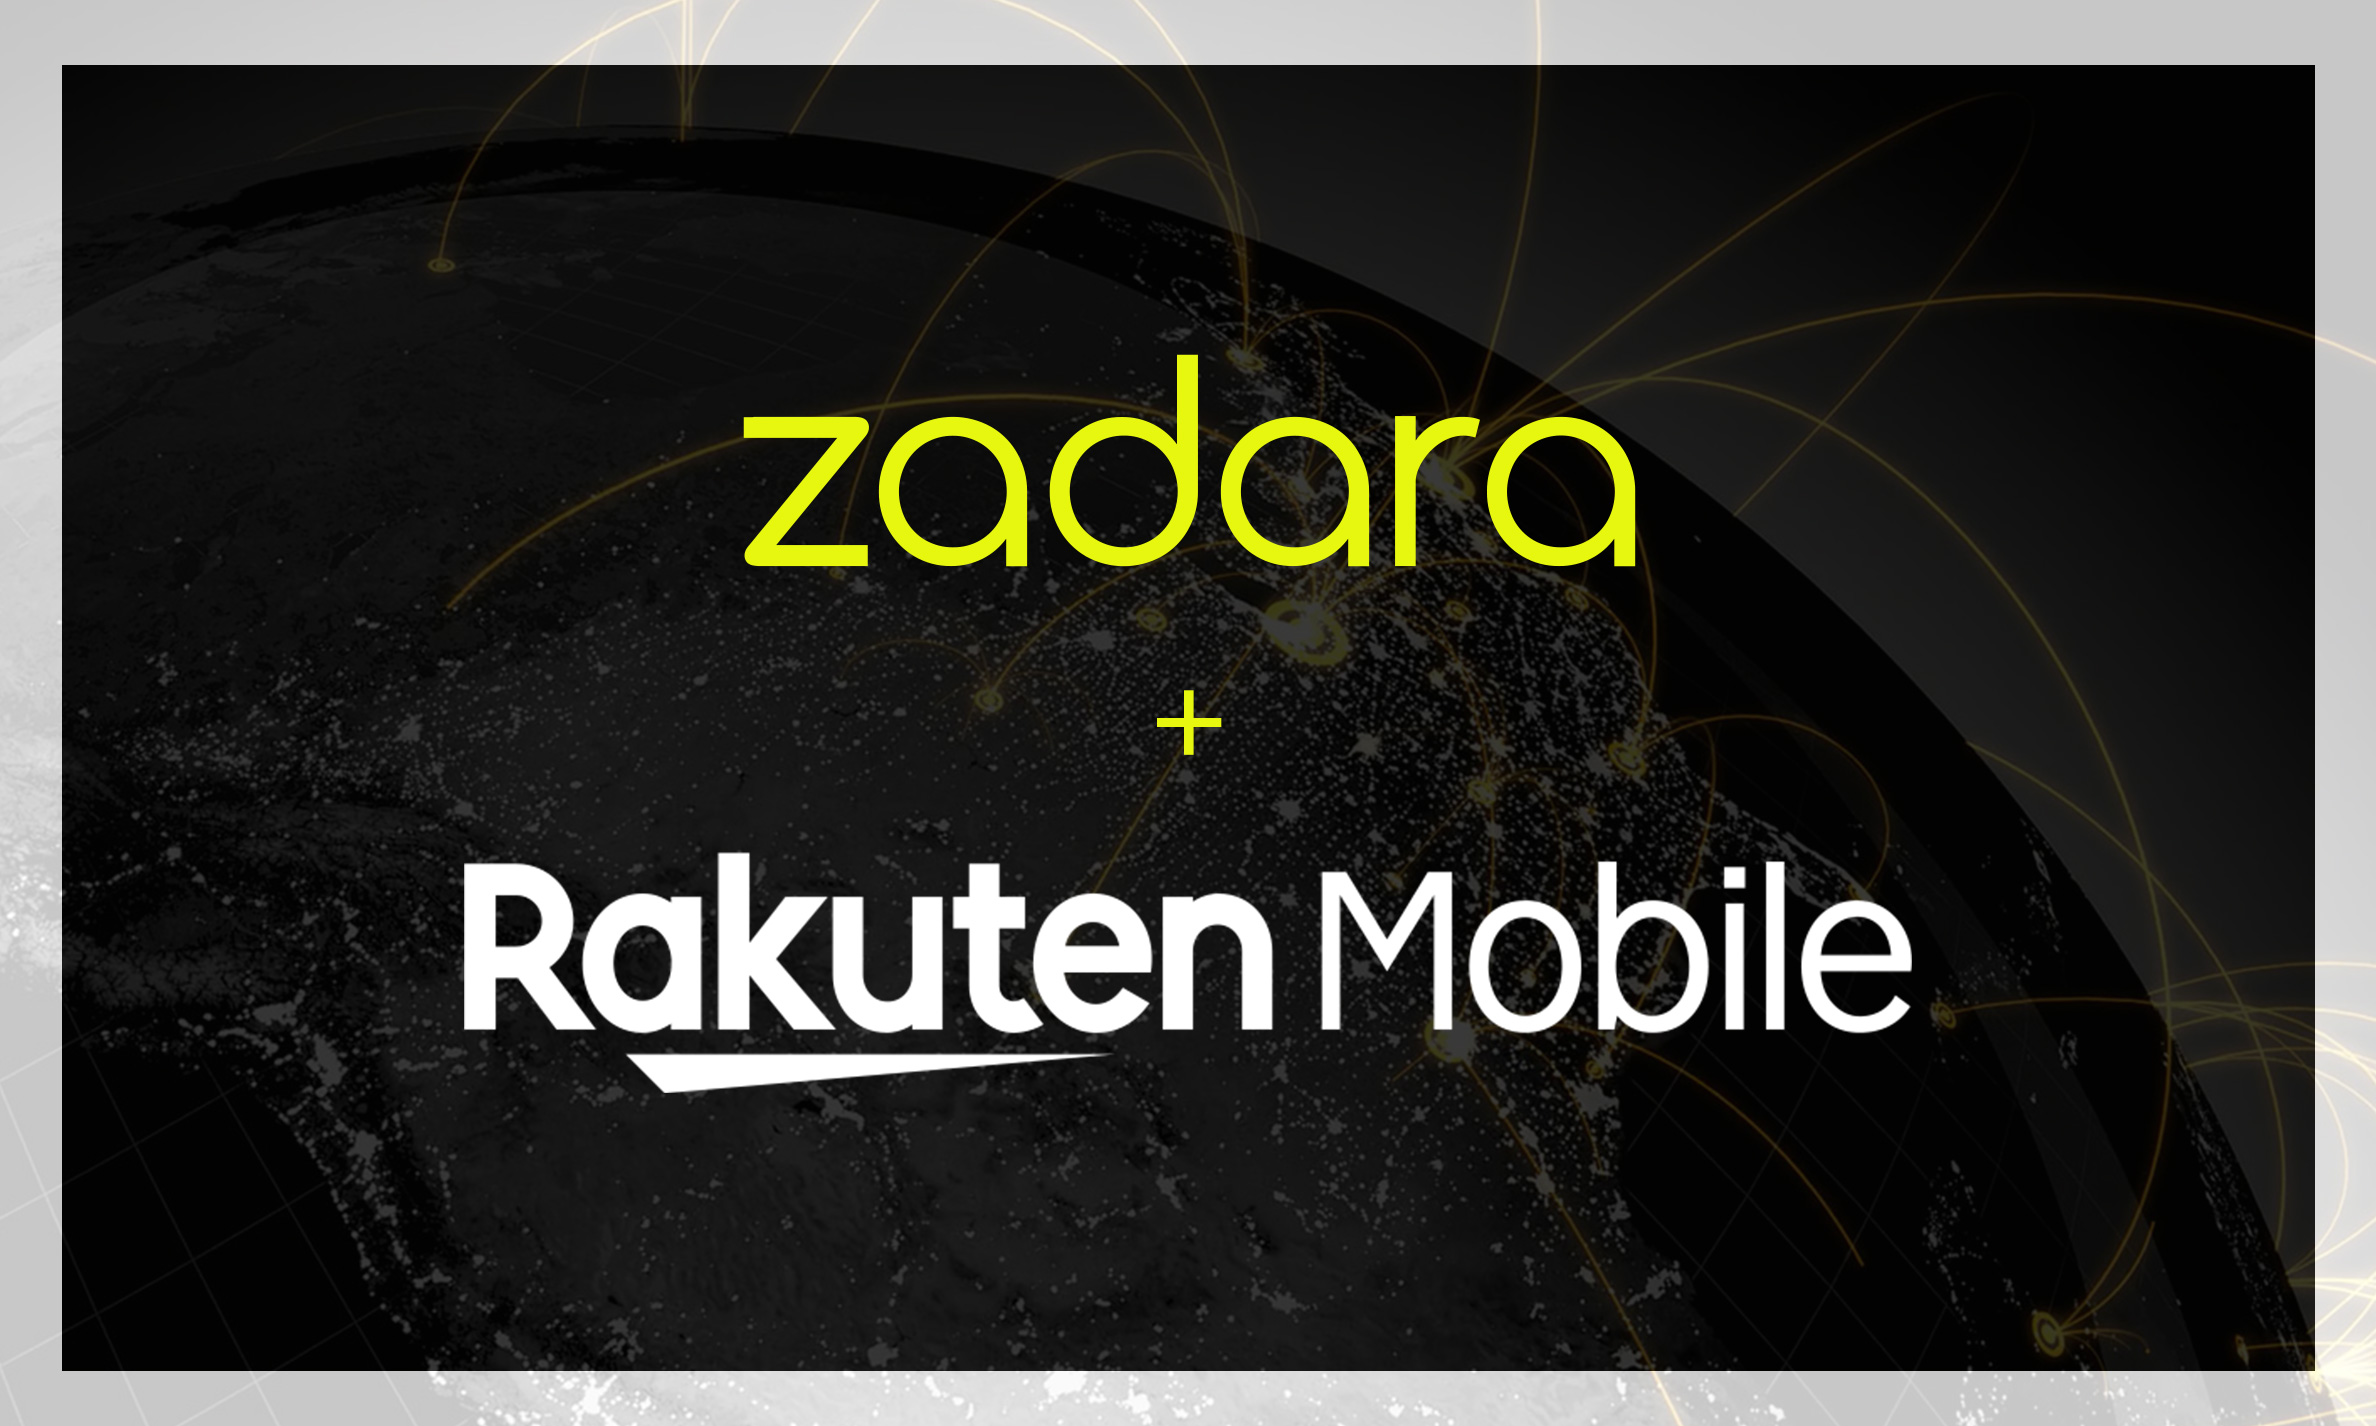 Rakuten Mobile Partners with Zadara to Provide Broad Storage Solutions for Its Fully Virtualized Mobile Network